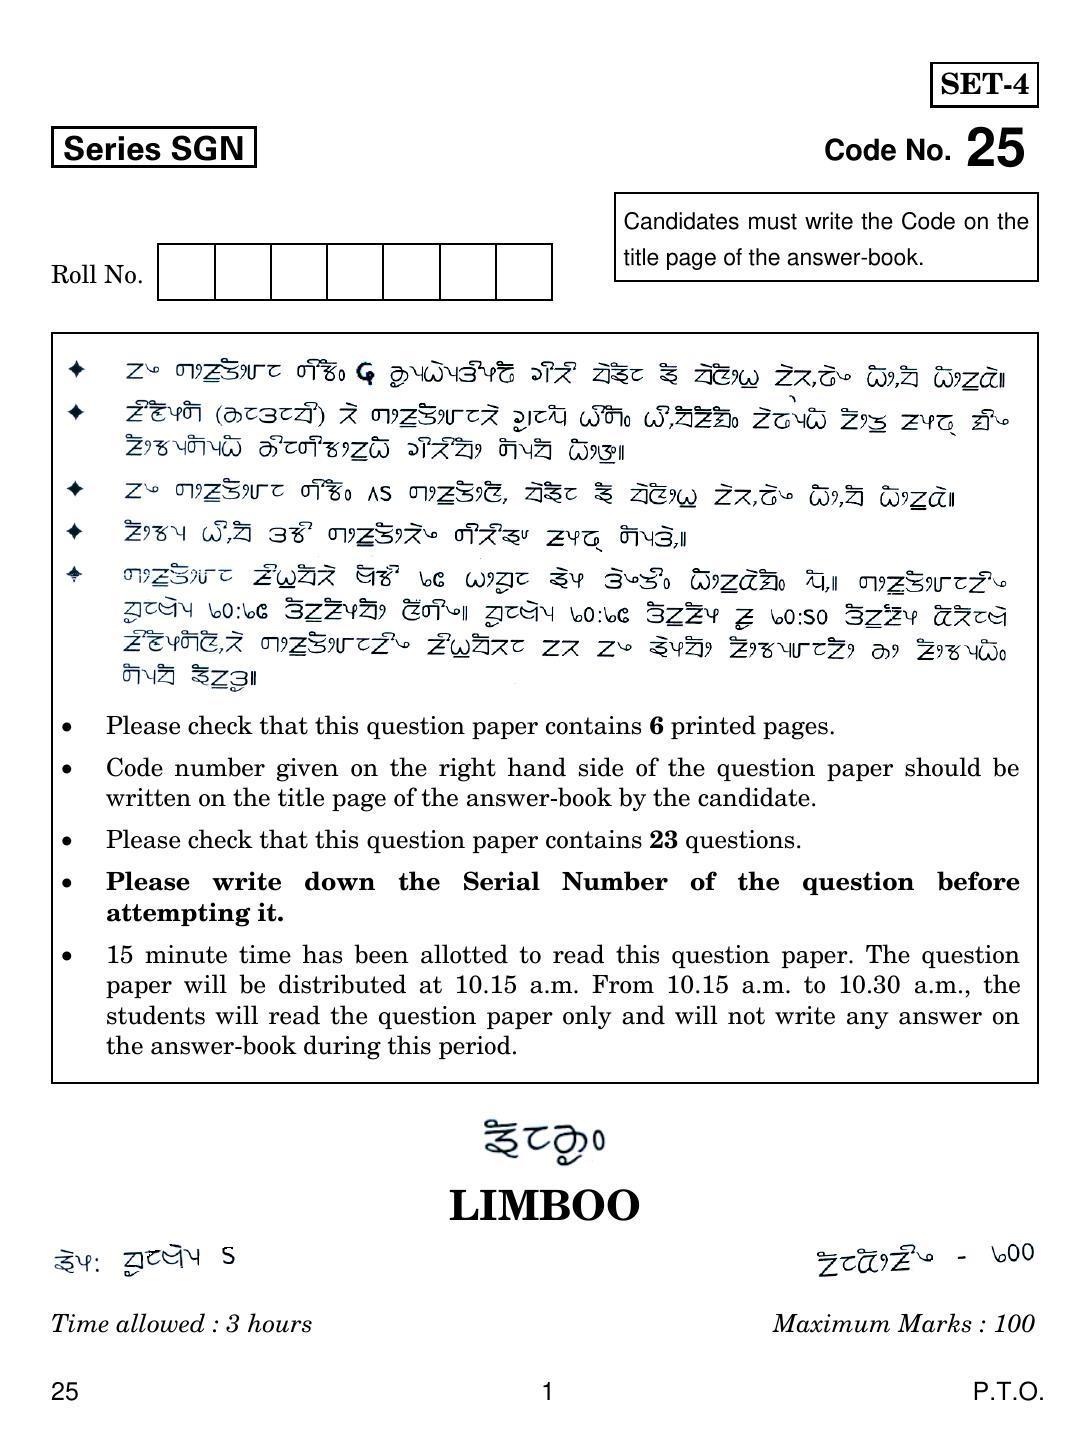 CBSE Class 12 25 Limboo 2018 Question Paper - Page 1